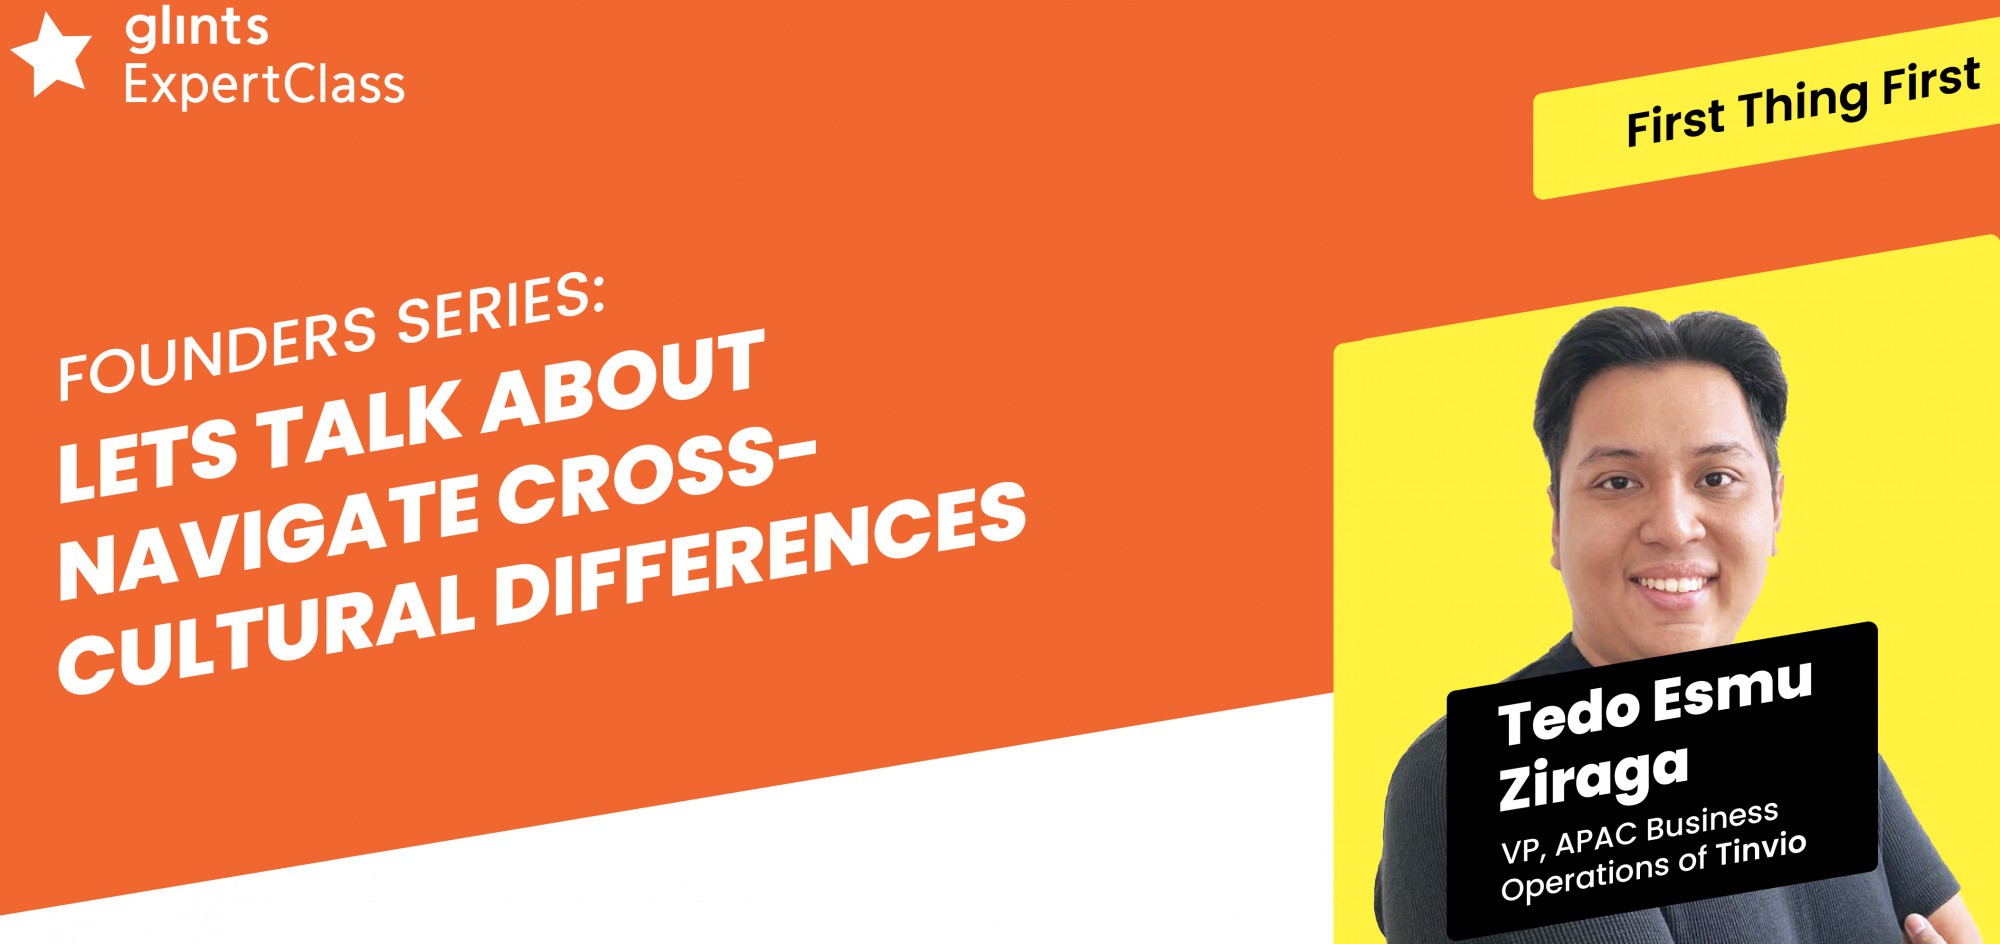 [Online ExpertClass] First Thing First : Let's Talk About Navigate Cross-Cultural Differences